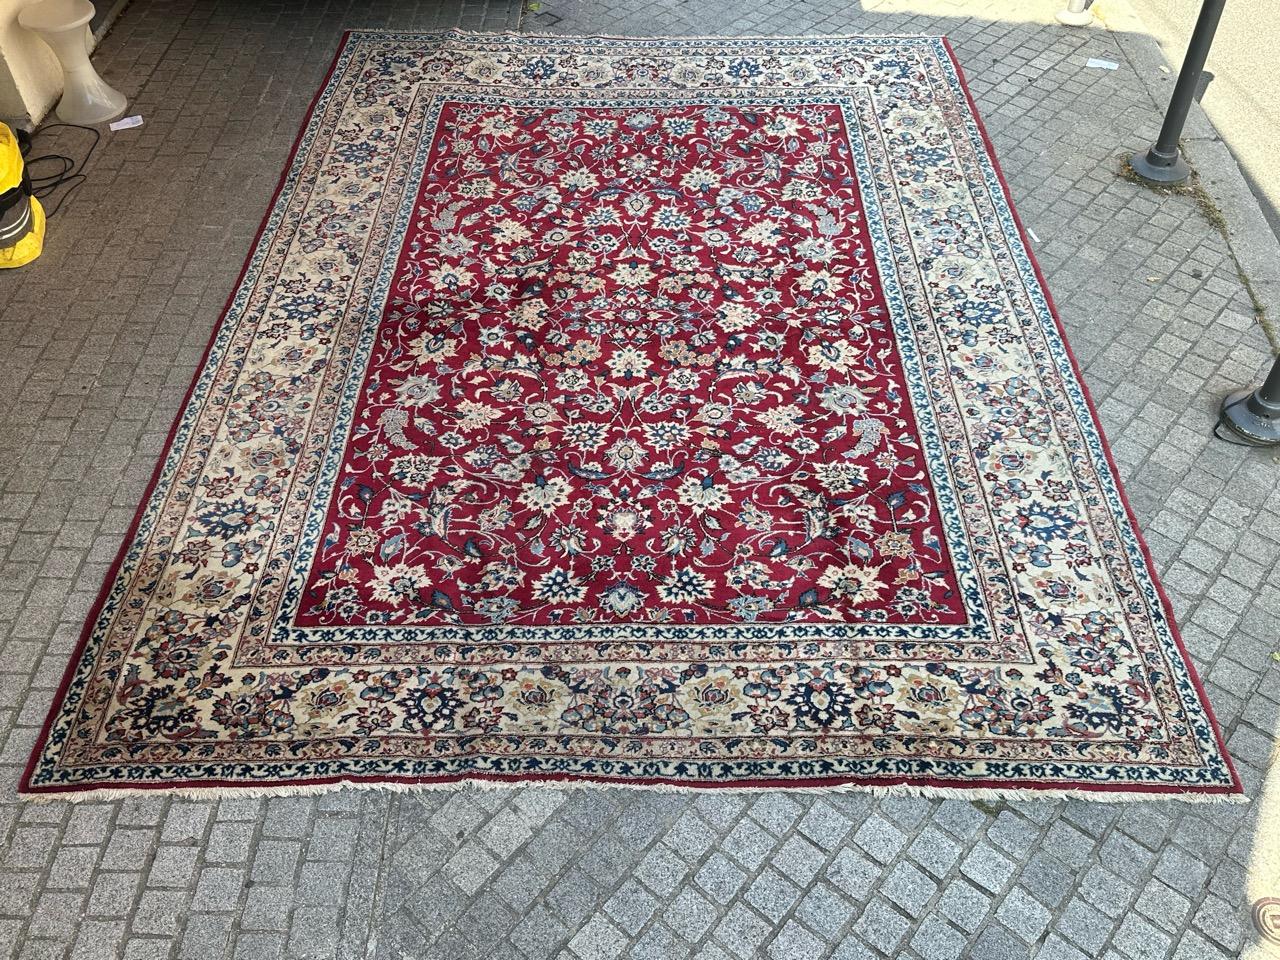 Discover the timeless elegance of this exquisite vintage Najaf Abad rug. Hand-knotted with luxurious wool velvet on a cotton base, its vibrant red backdrop showcases stylized floral and branch motifs in captivating blue, green, orange, and white